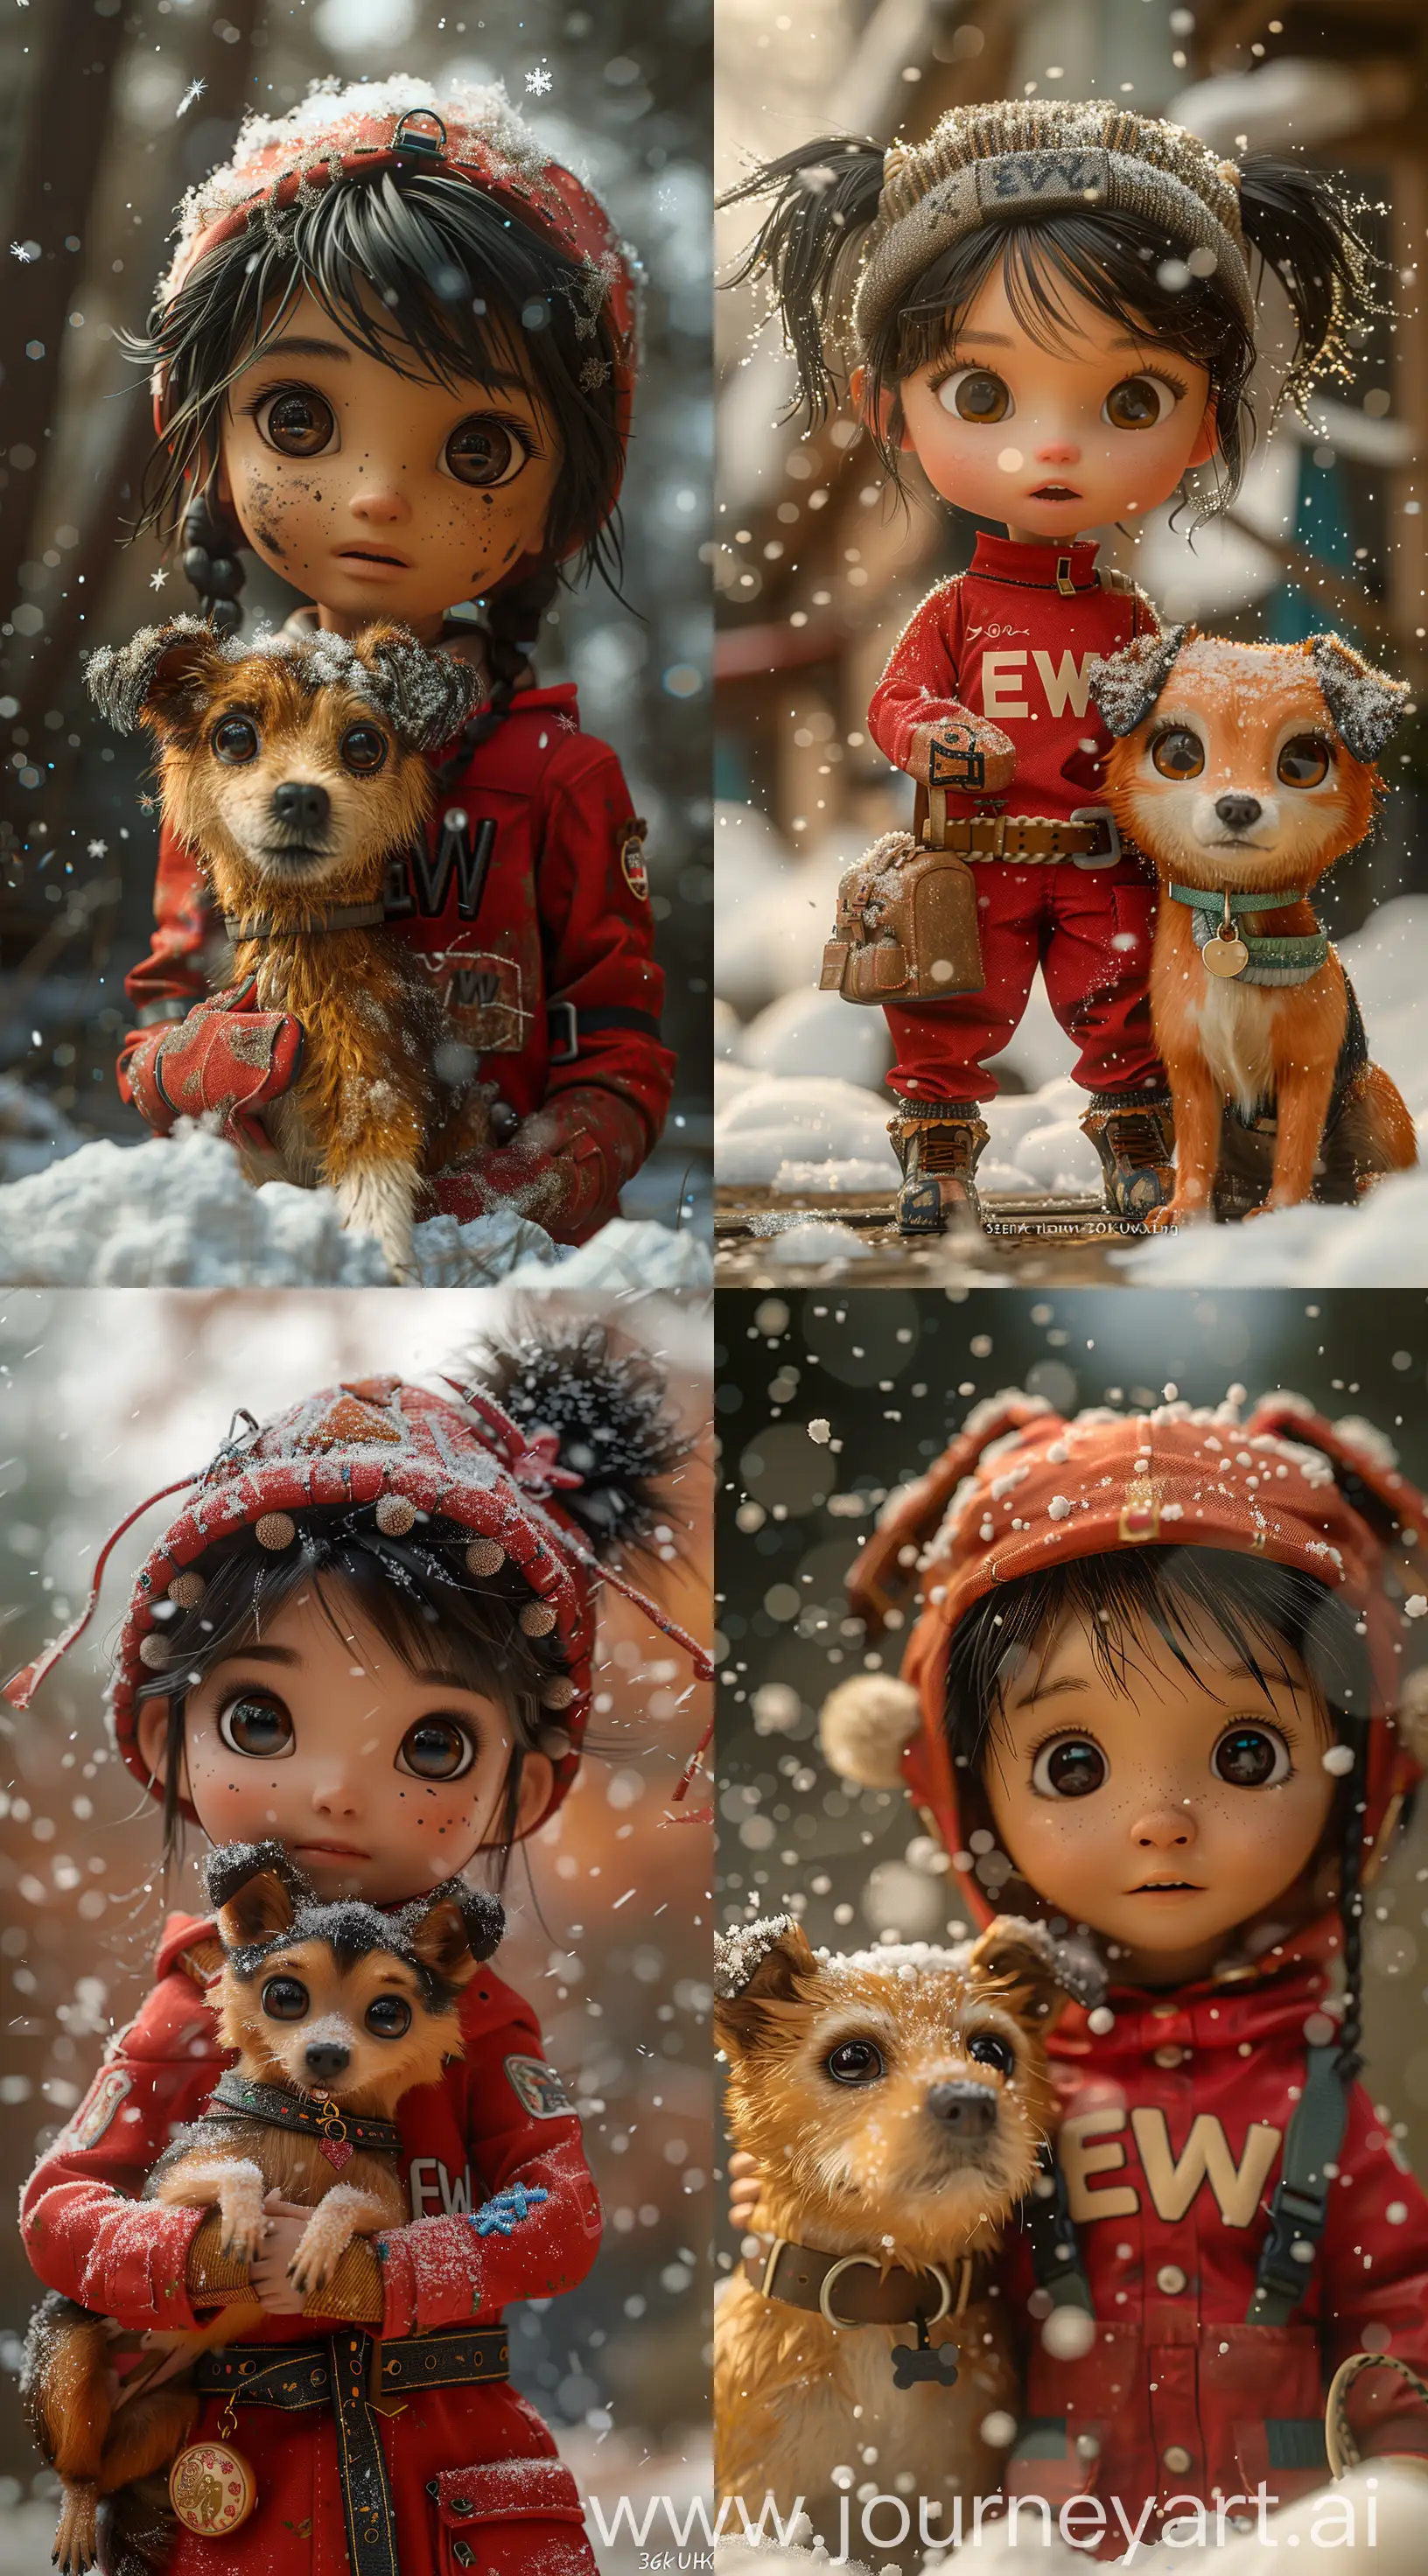 3d model of a cute girl in red outfit with the inscription "EWW" holding a dog in snow,  snowparticle, in the style of ilya kuvshinov, seth macfarlane, meticulous photorealistic still lifes, david teniers the younger, charming character illustrations, use of screen tones, 32k uhd --ar 71:128 --stylize 750